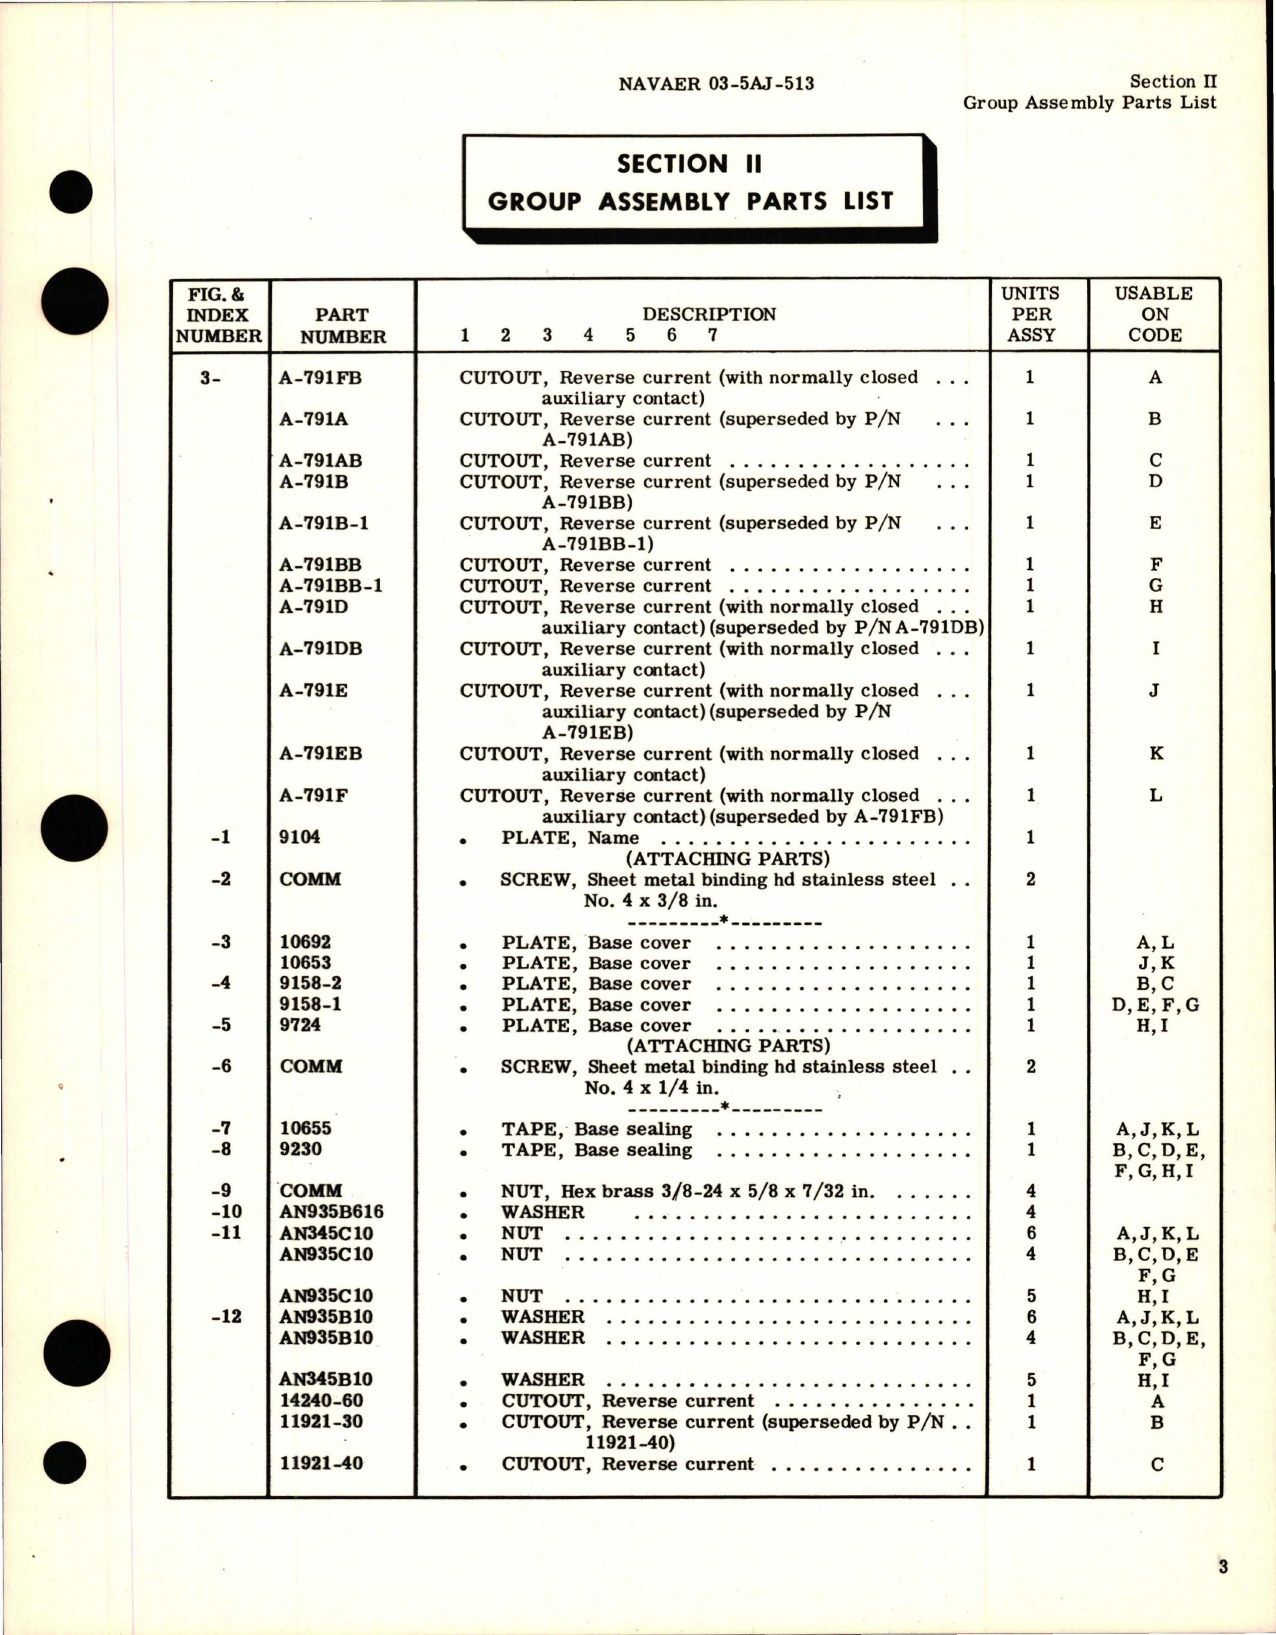 Sample page 7 from AirCorps Library document: Illustrated Parts Breakdown for Reverse Current Cutout 